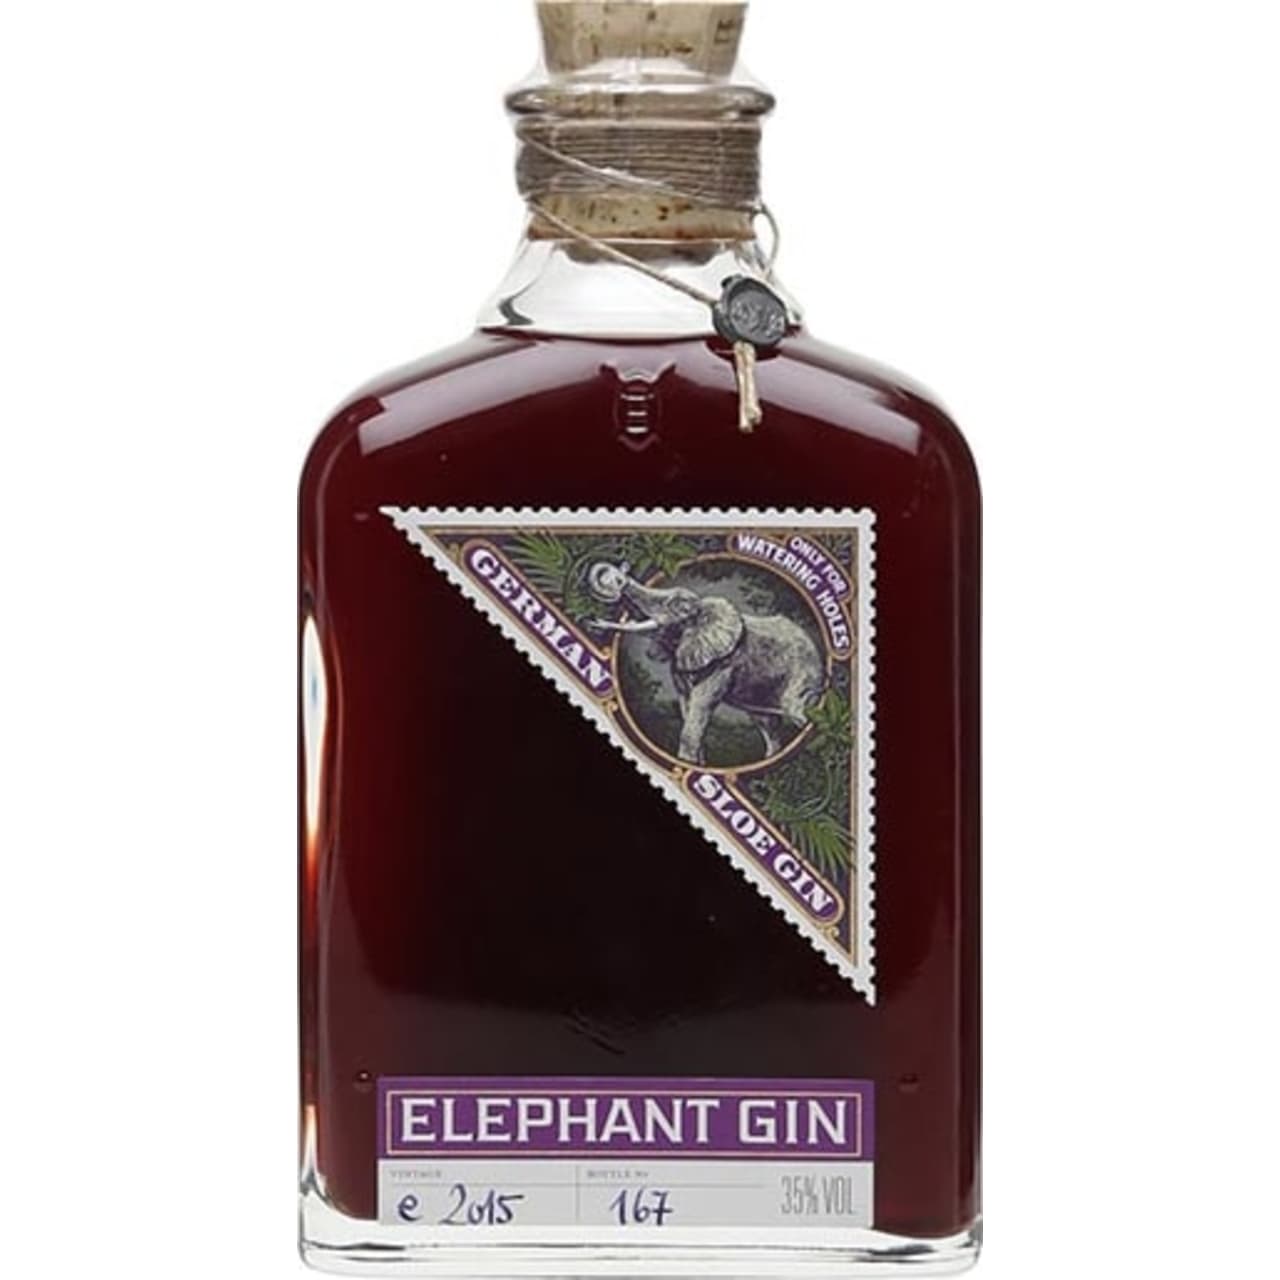 They have combined their award-winning Elephant London Dry Gin with the classic flavour of fresh sloe berries. Macerated in the gin for several months, these wild berries add a richly rounded, lightly sweet and exquisitely fruity bouquet as well as a typical warm red colour to the spirit.